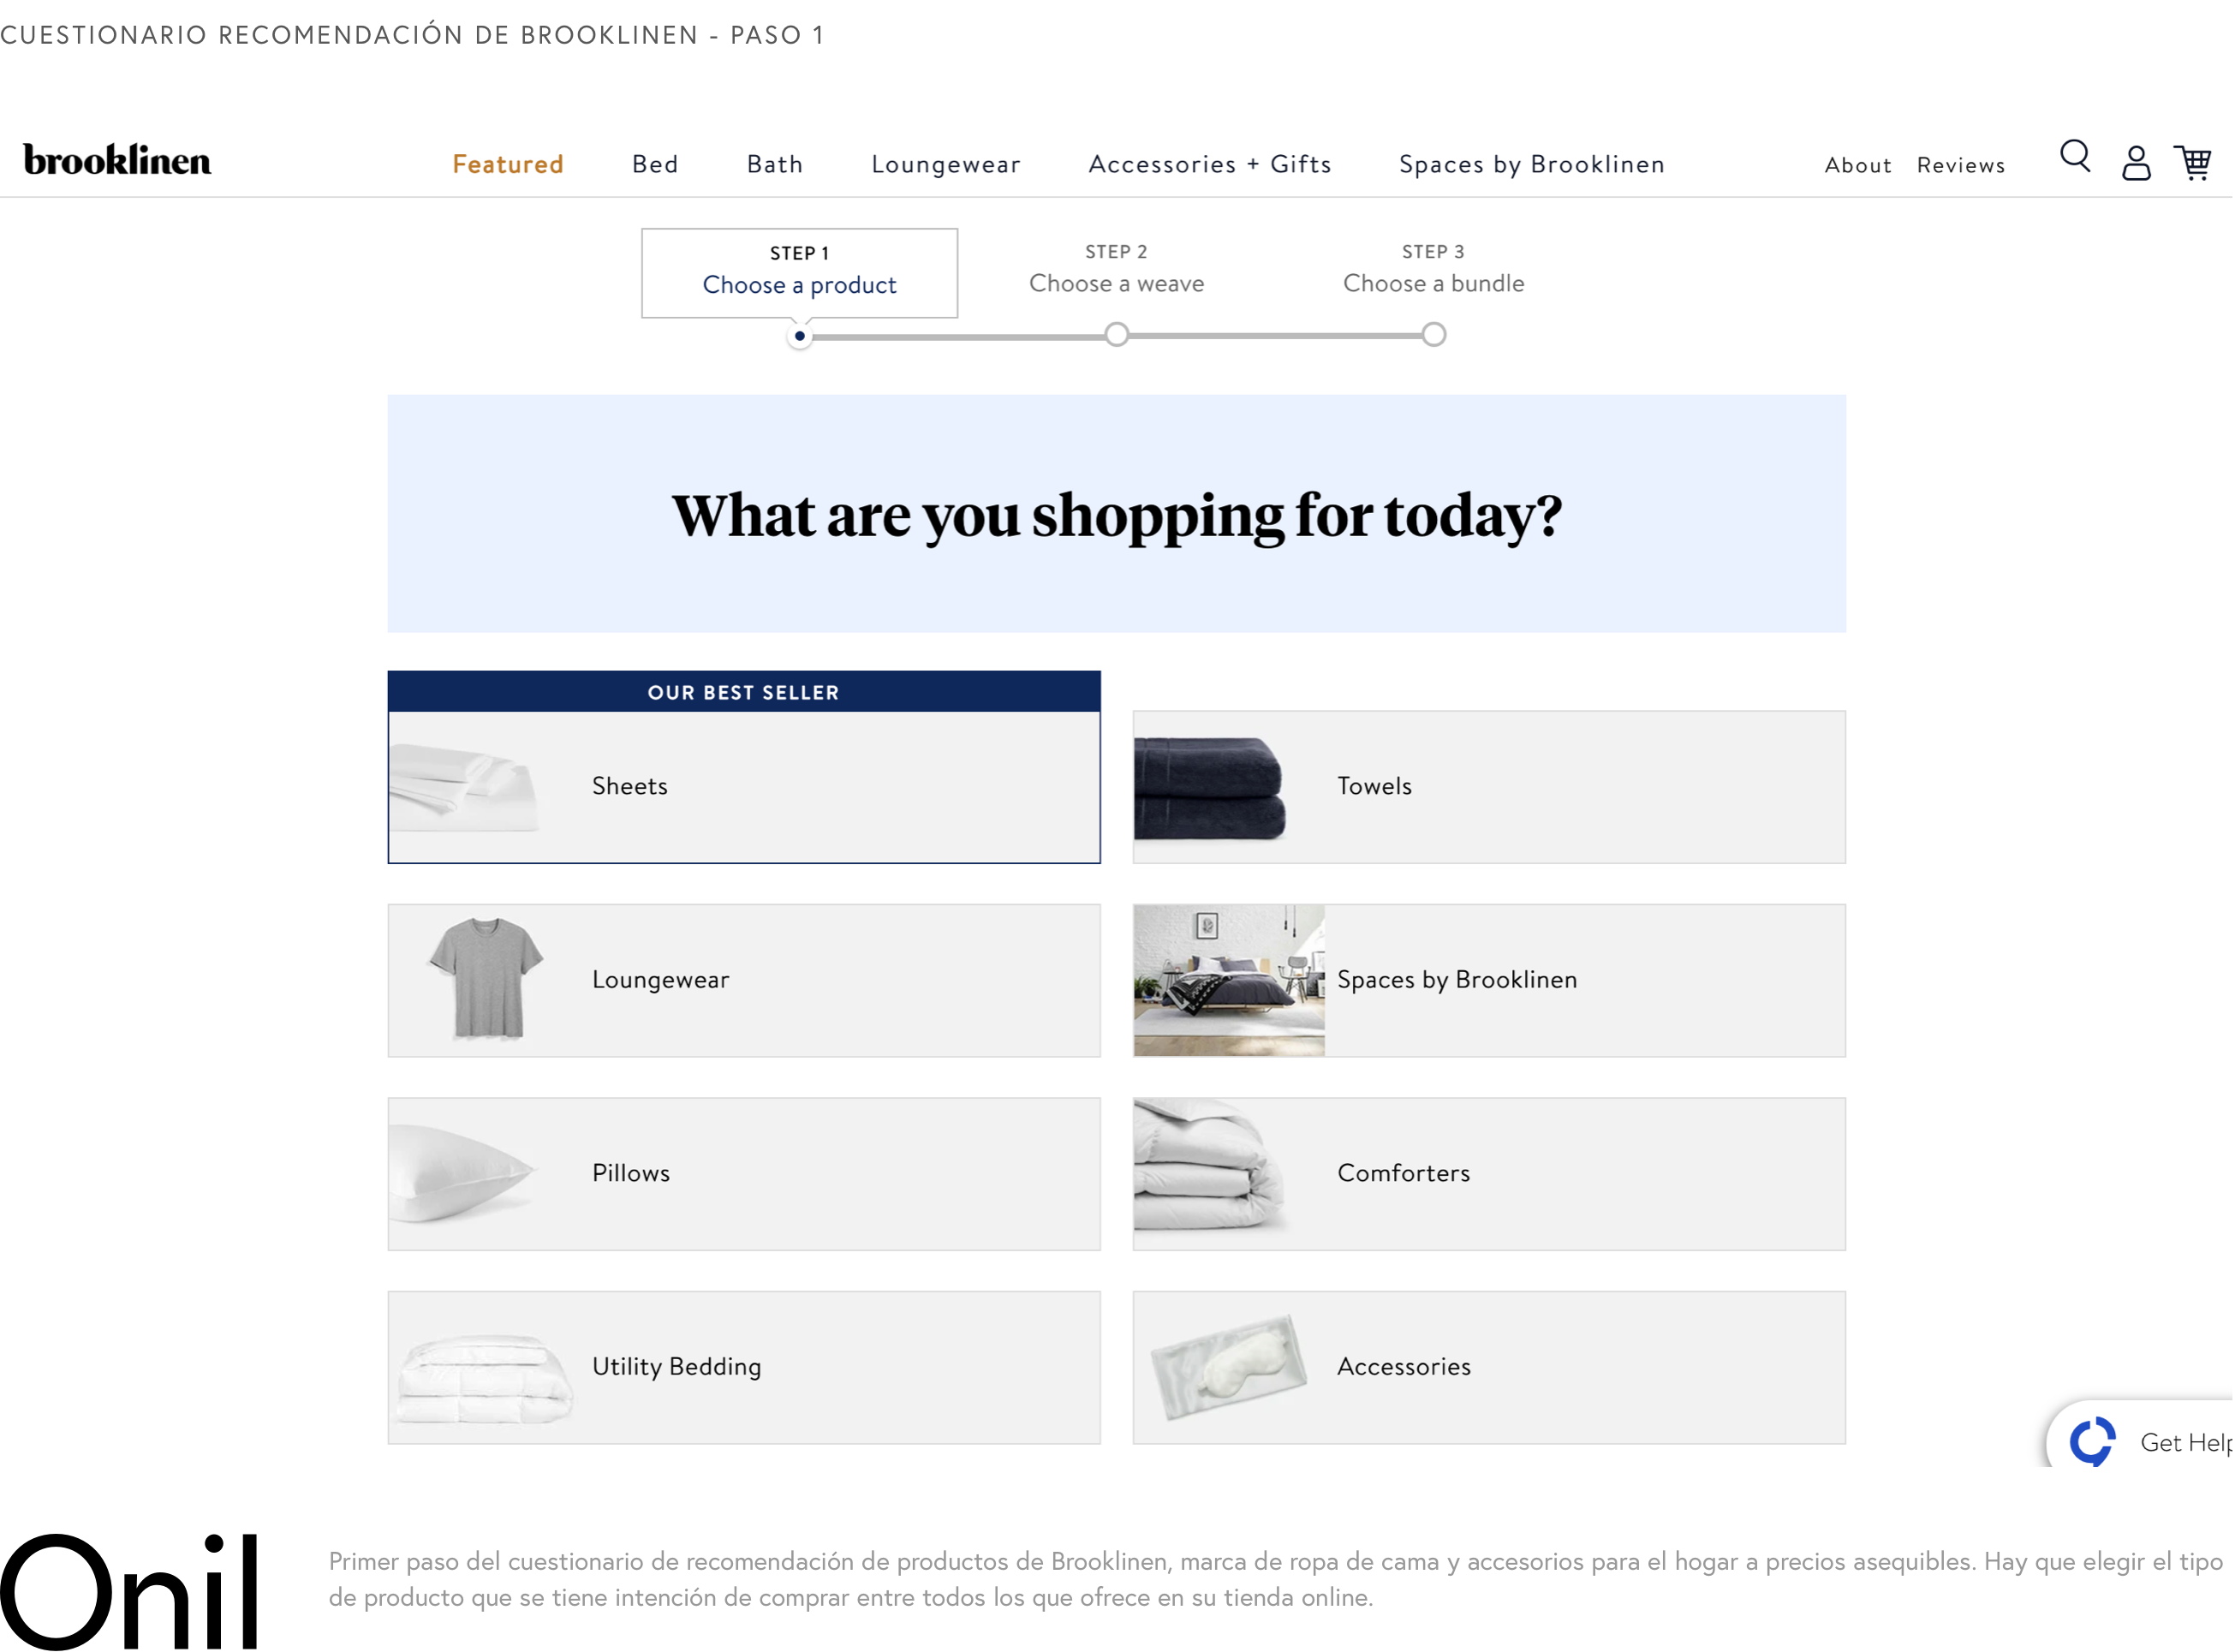 Brooklinen Recommendation Questionnaire, Step 1 - First step of the Brooklinen Product Recommendation Questionnaire. Choose the type of product that you intend to buy among all those offered in your online store.